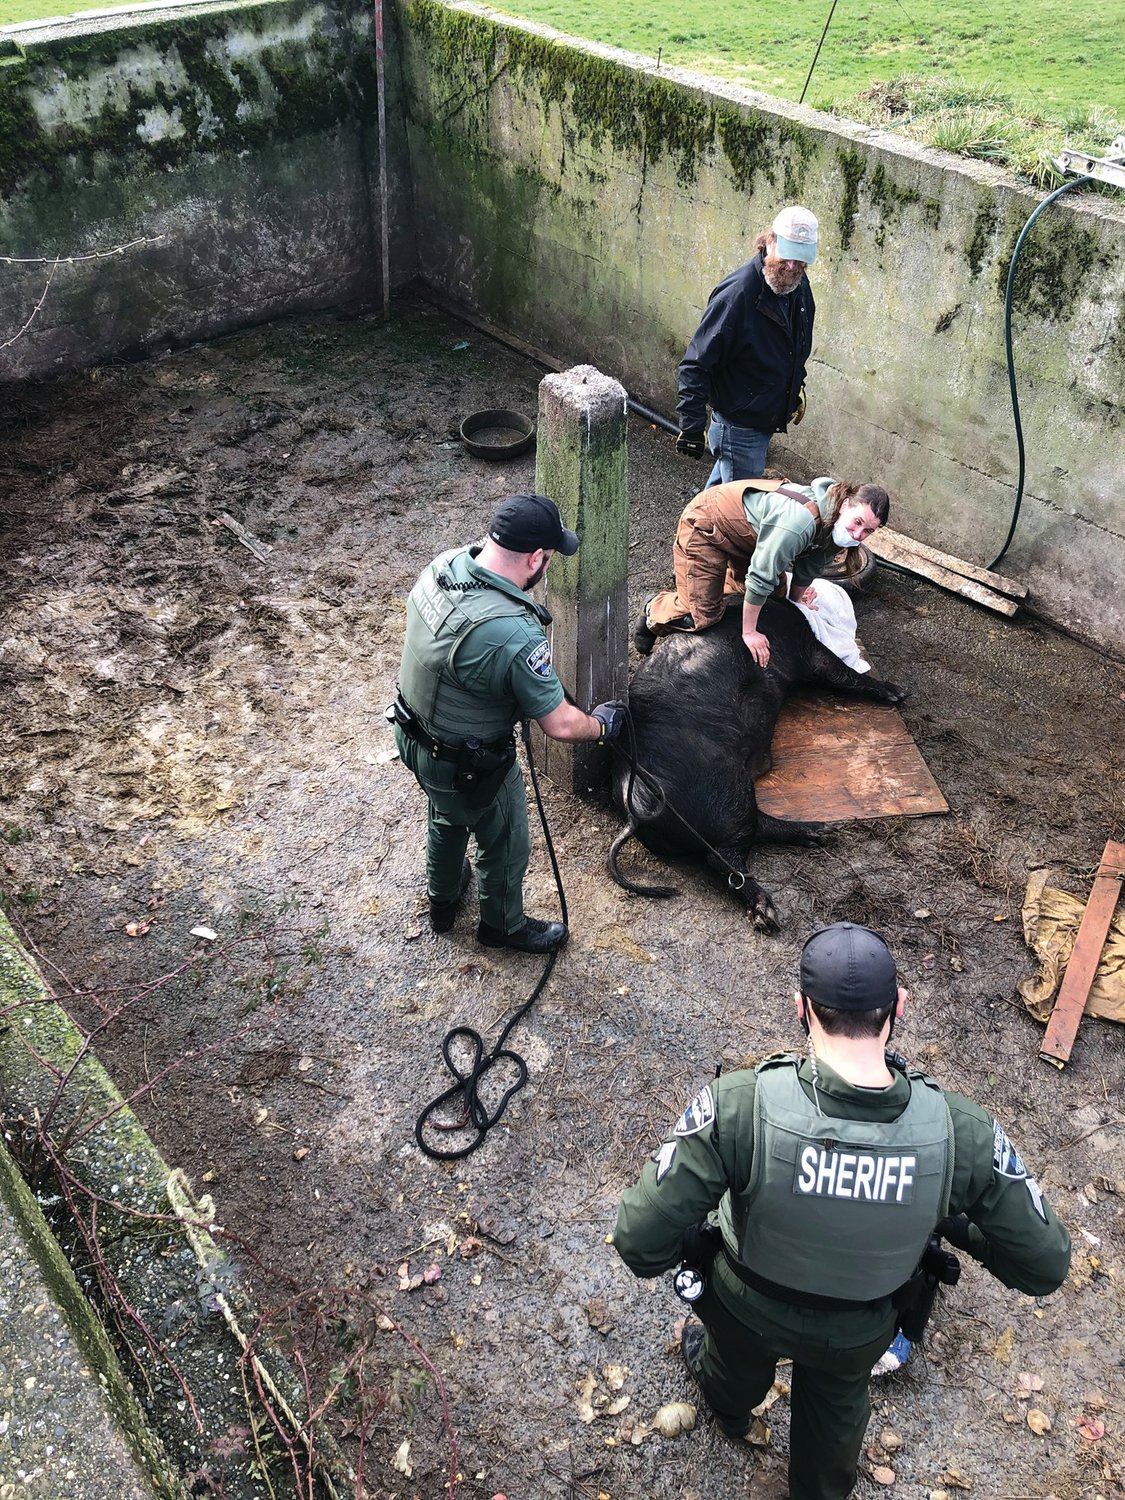 Sheriff’s deputies and helpers from the Central Valley Animal Rescue prepare to hoist a pig out of a pit in Chimacum last week.